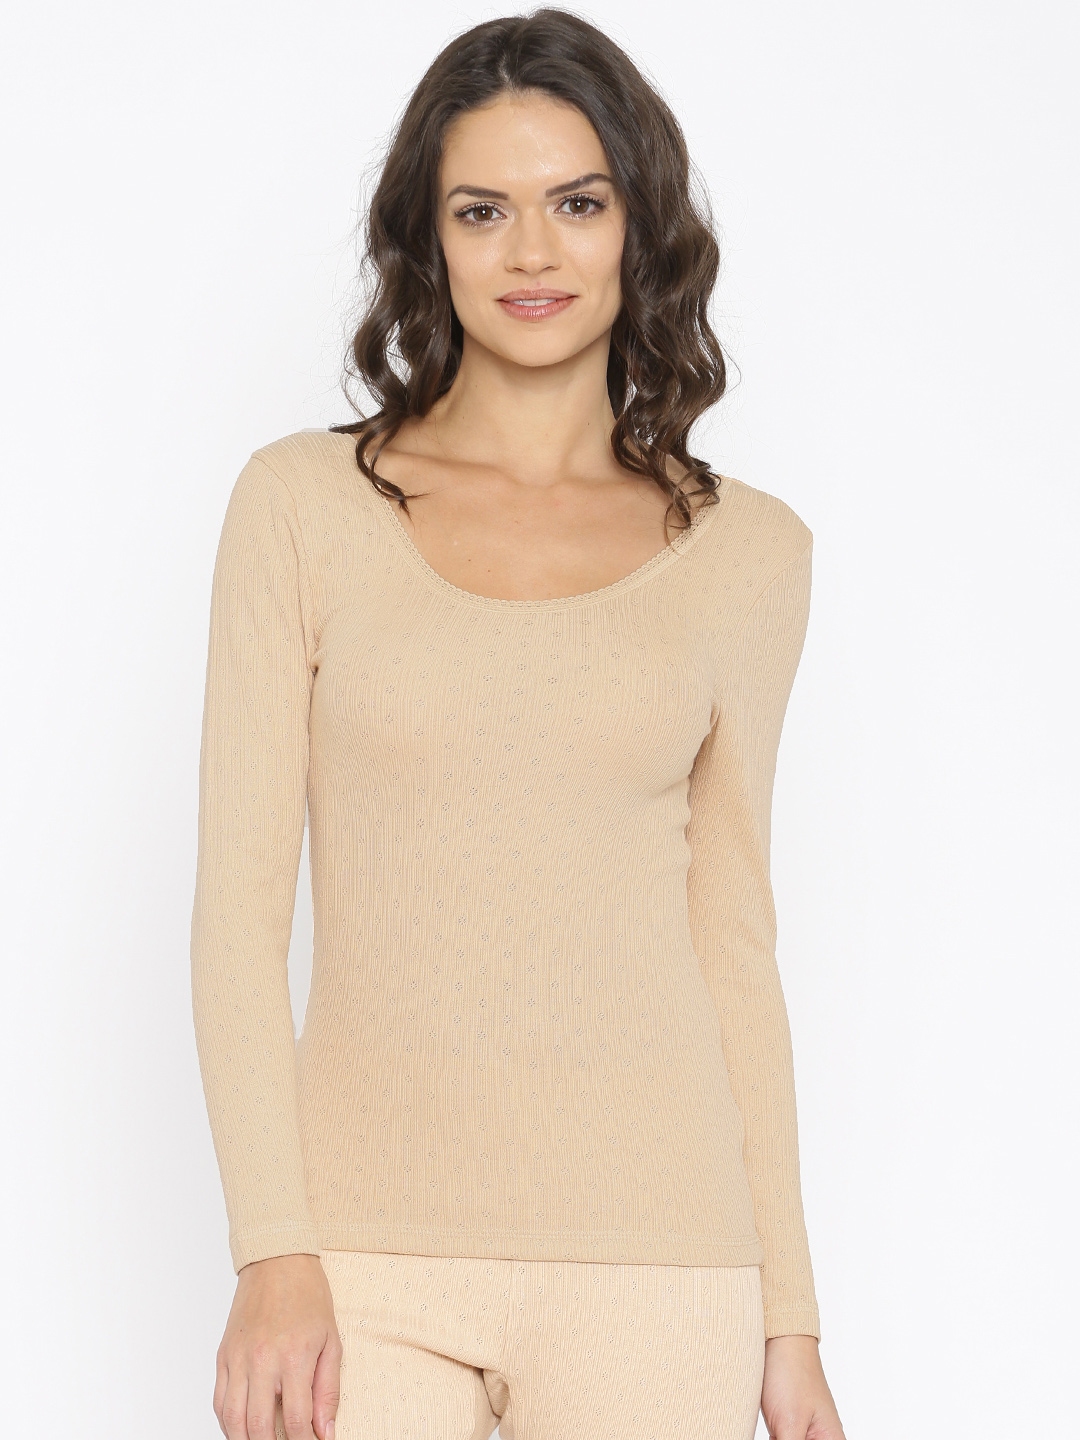 Buy Kanvin Nude Coloured Thermal Top - Thermal Tops for Women